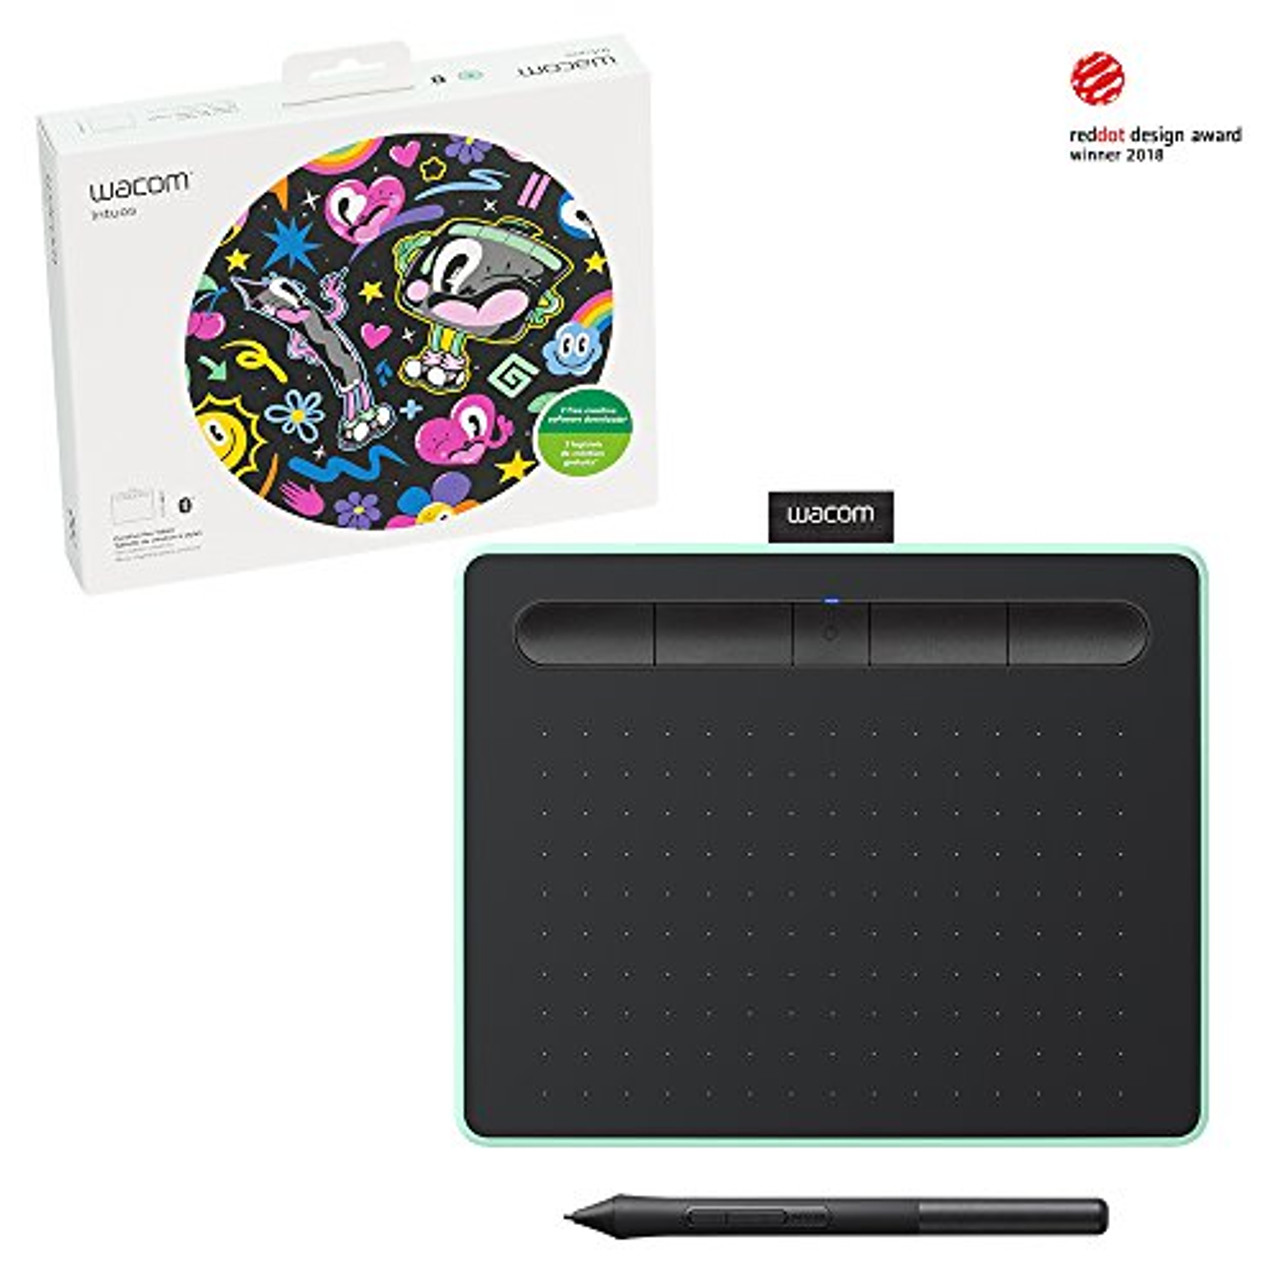 Wacom Intuos Small Wireless Graphics Drawing Tablet - Black